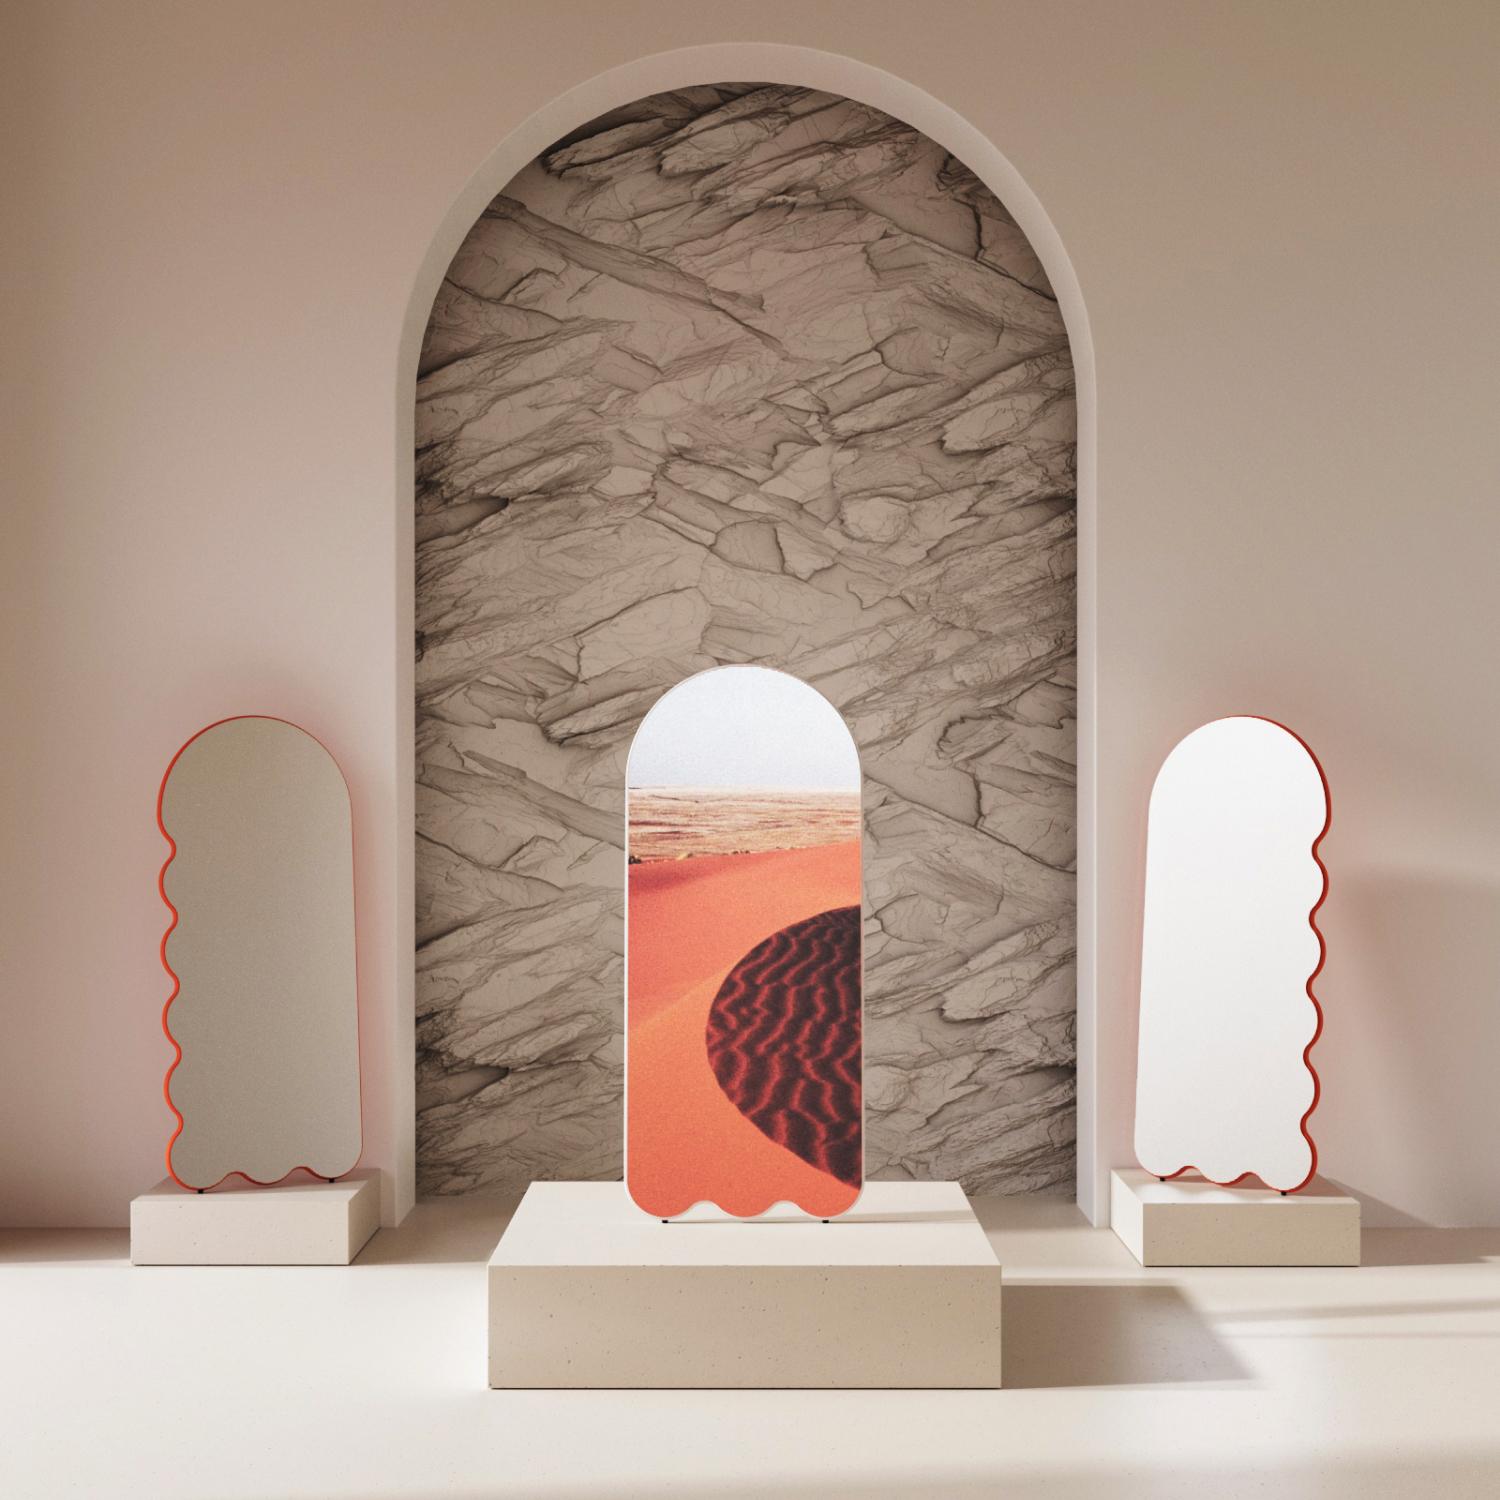 ARCHVYLI mirror
In our collection, we have two different mirrors that are bestsellers: Hvyli (wavy) and Loveself 01 (arched) mirrors.
When choosing between them, our clients always fell into a stupor and could not decide, as they adore